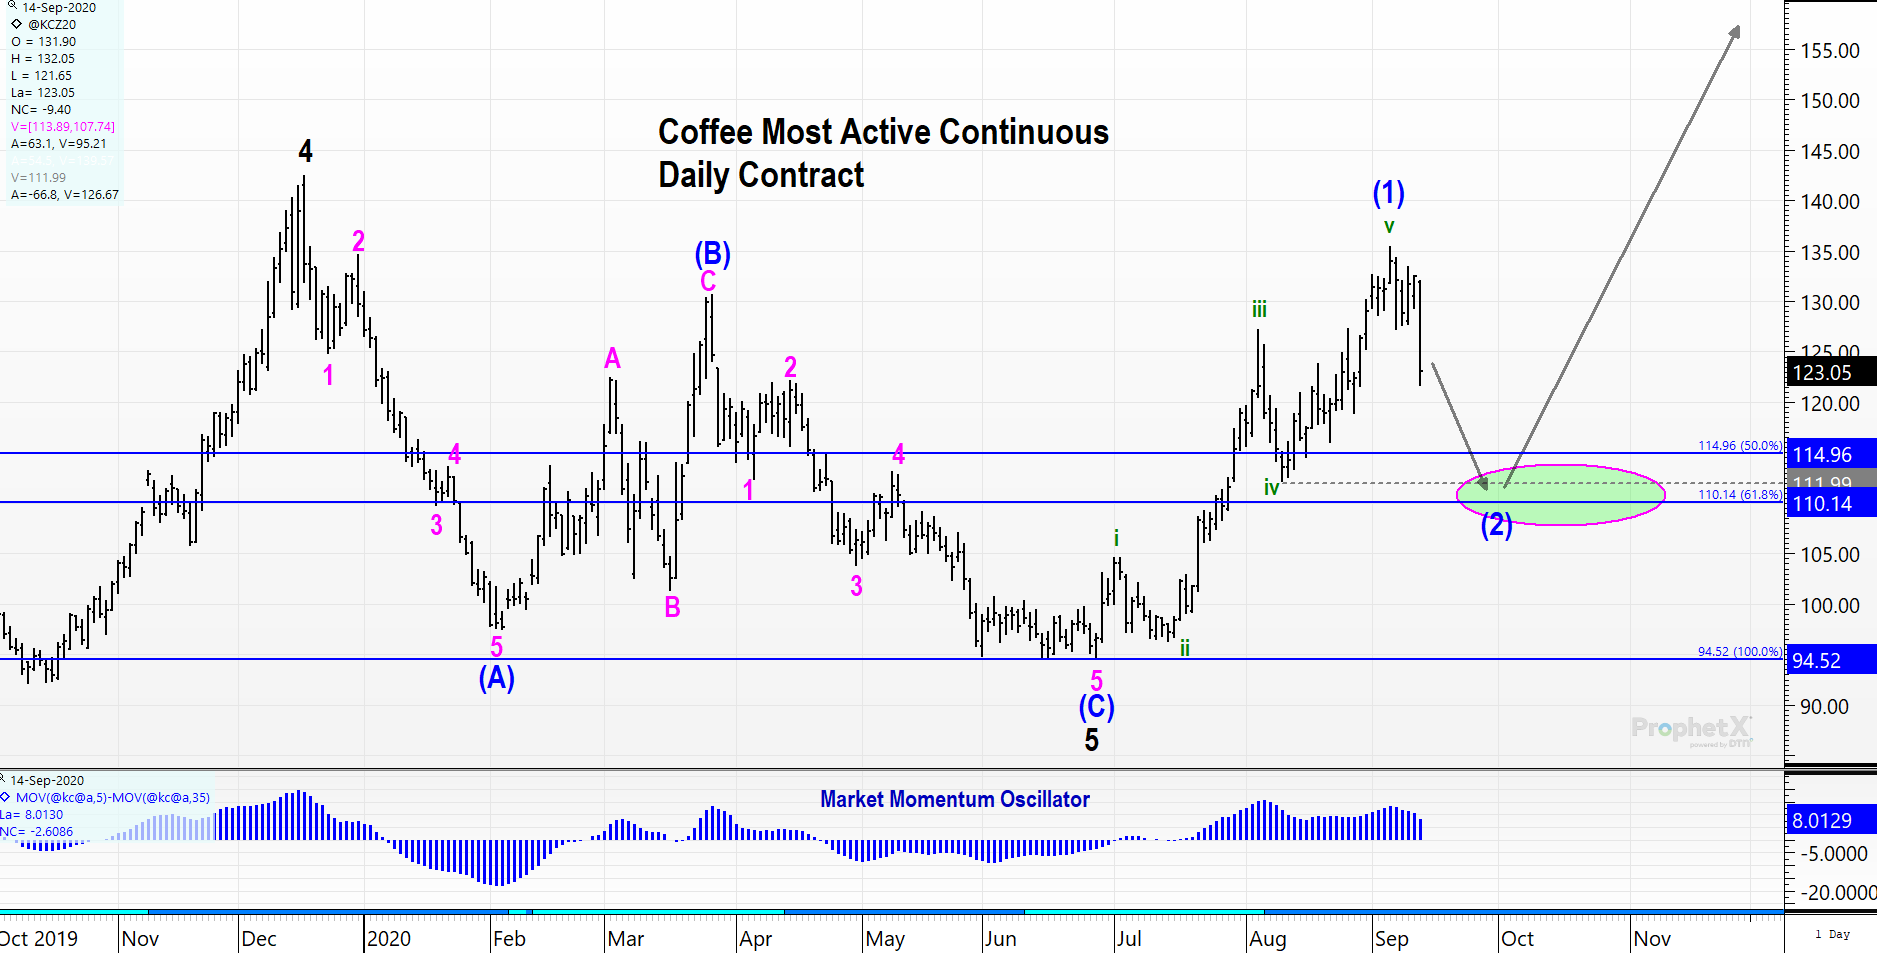 Coffee Futures Continuous Contract